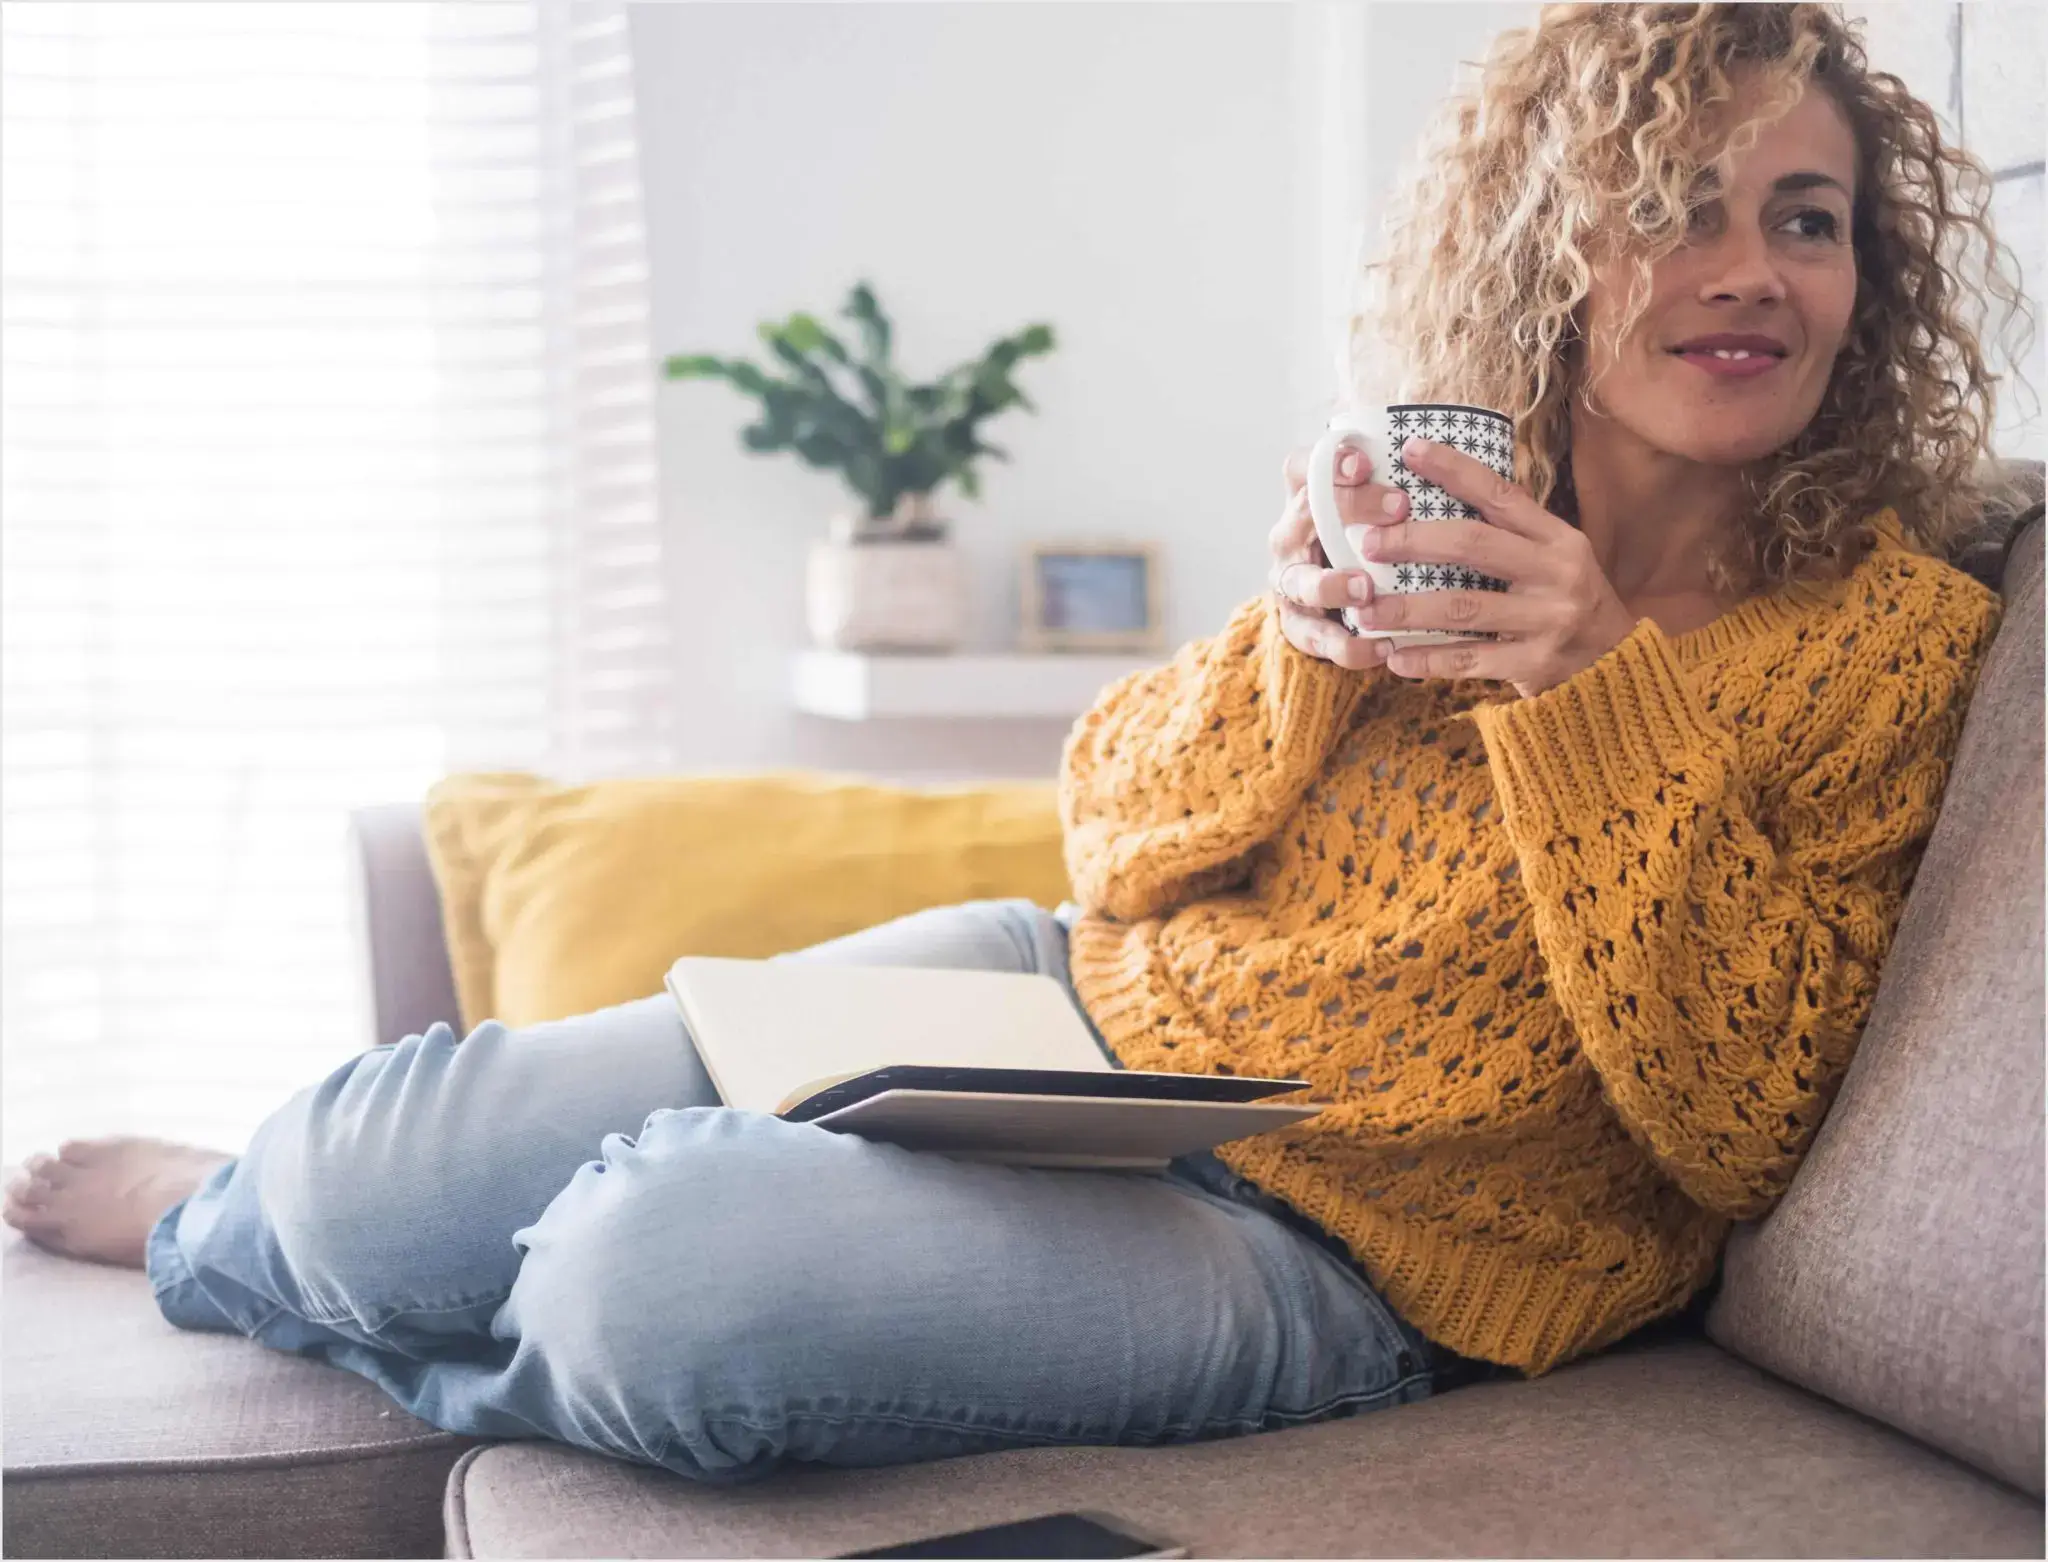 Woman on her couch at home with a notebook in her lap and a mug in her hands